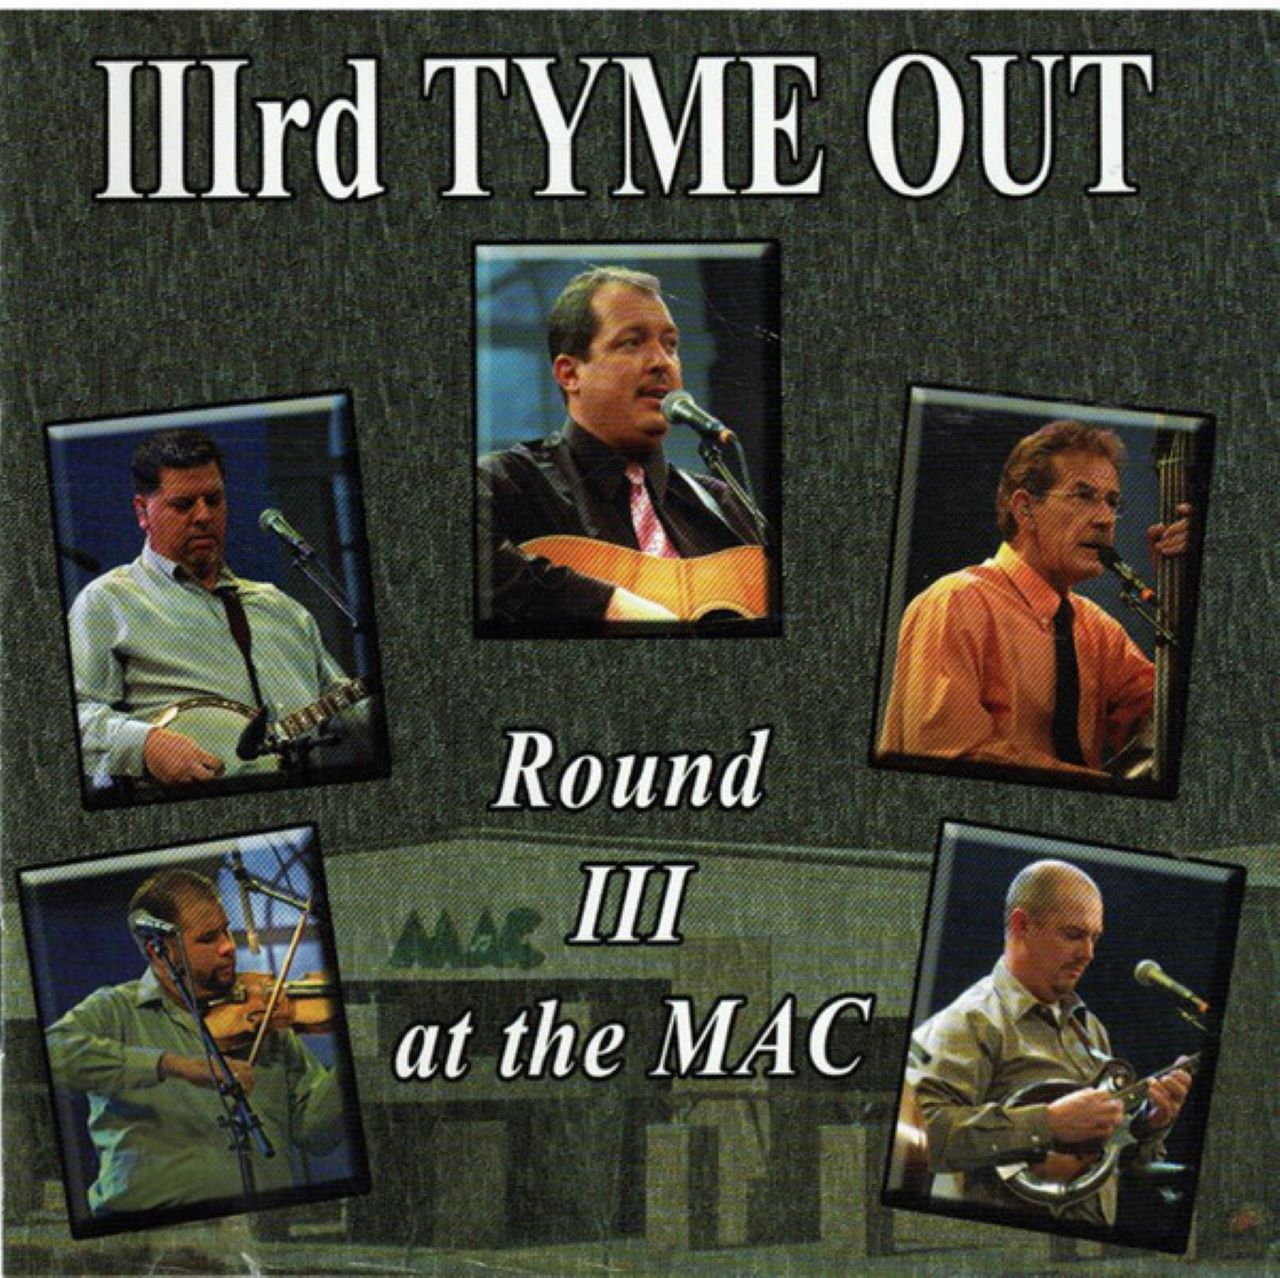 IIIrd Tyme Out - Round III At The Mac cover album